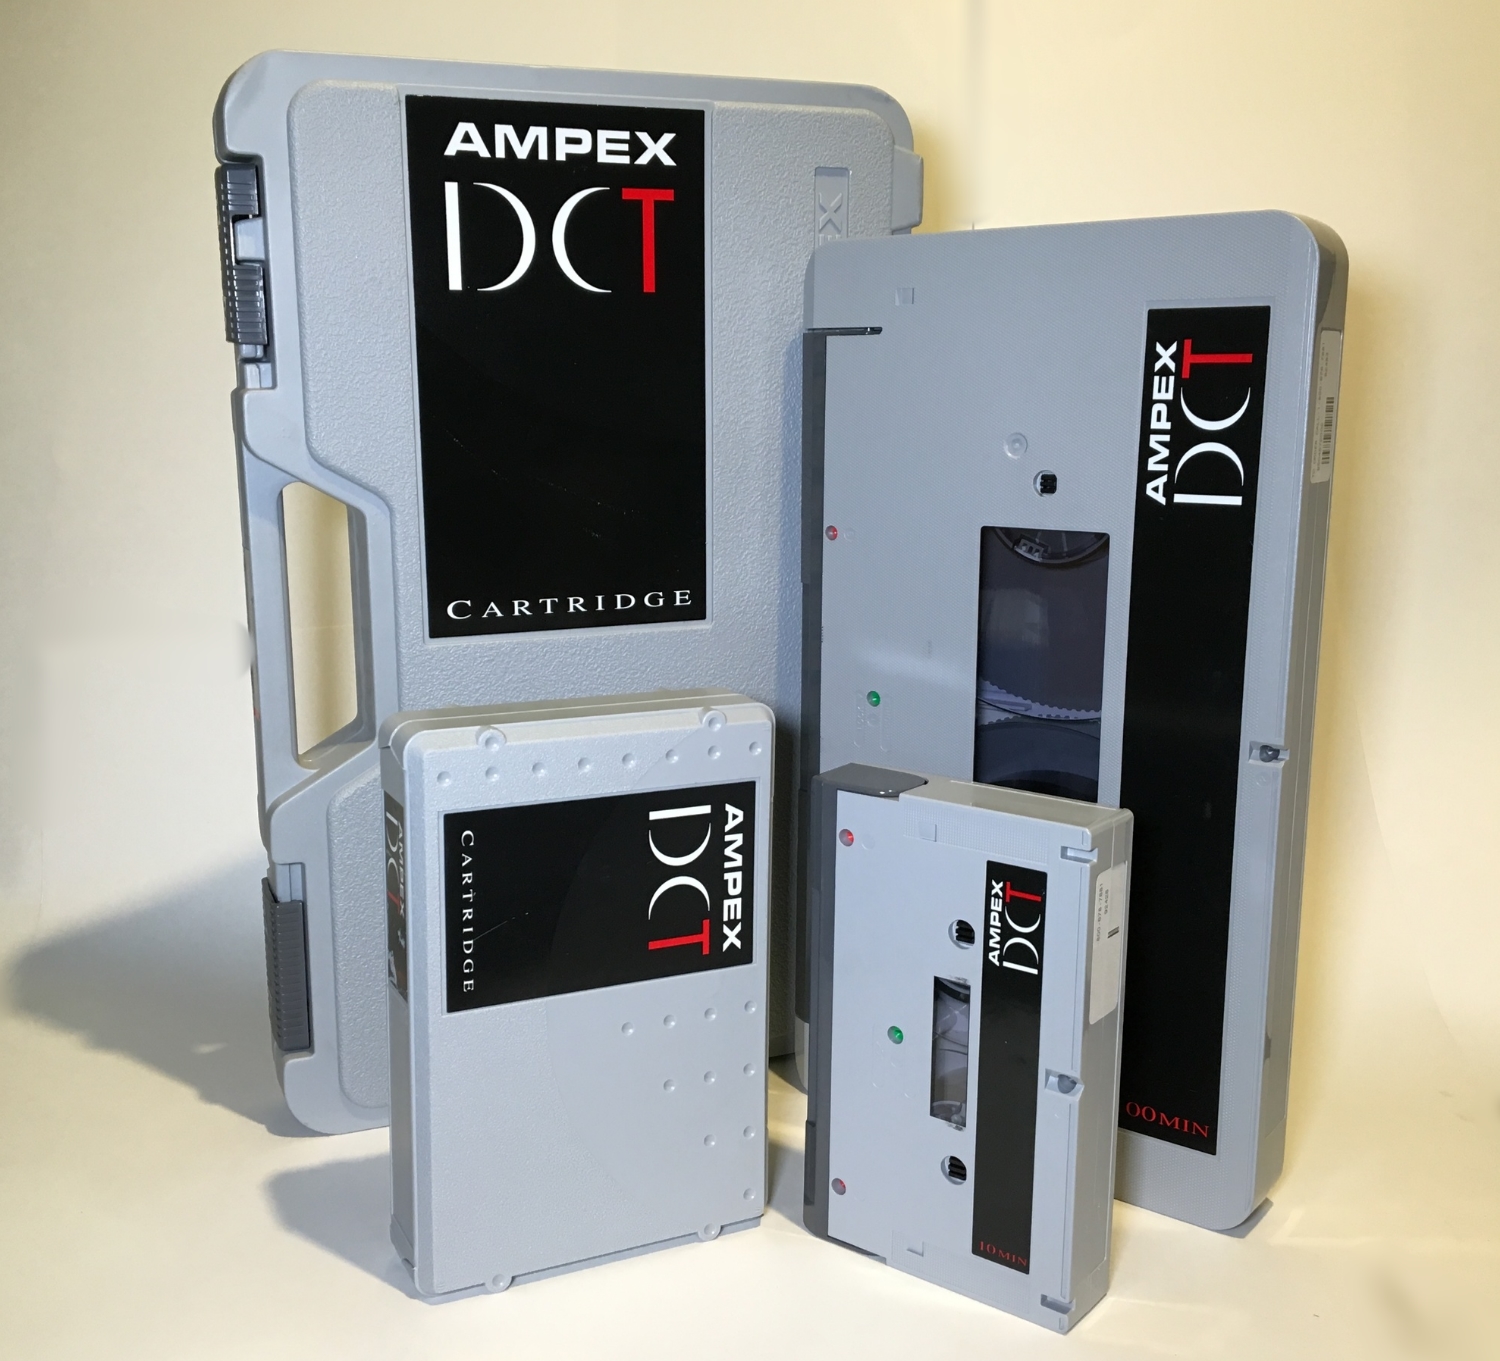 Ampex DCT